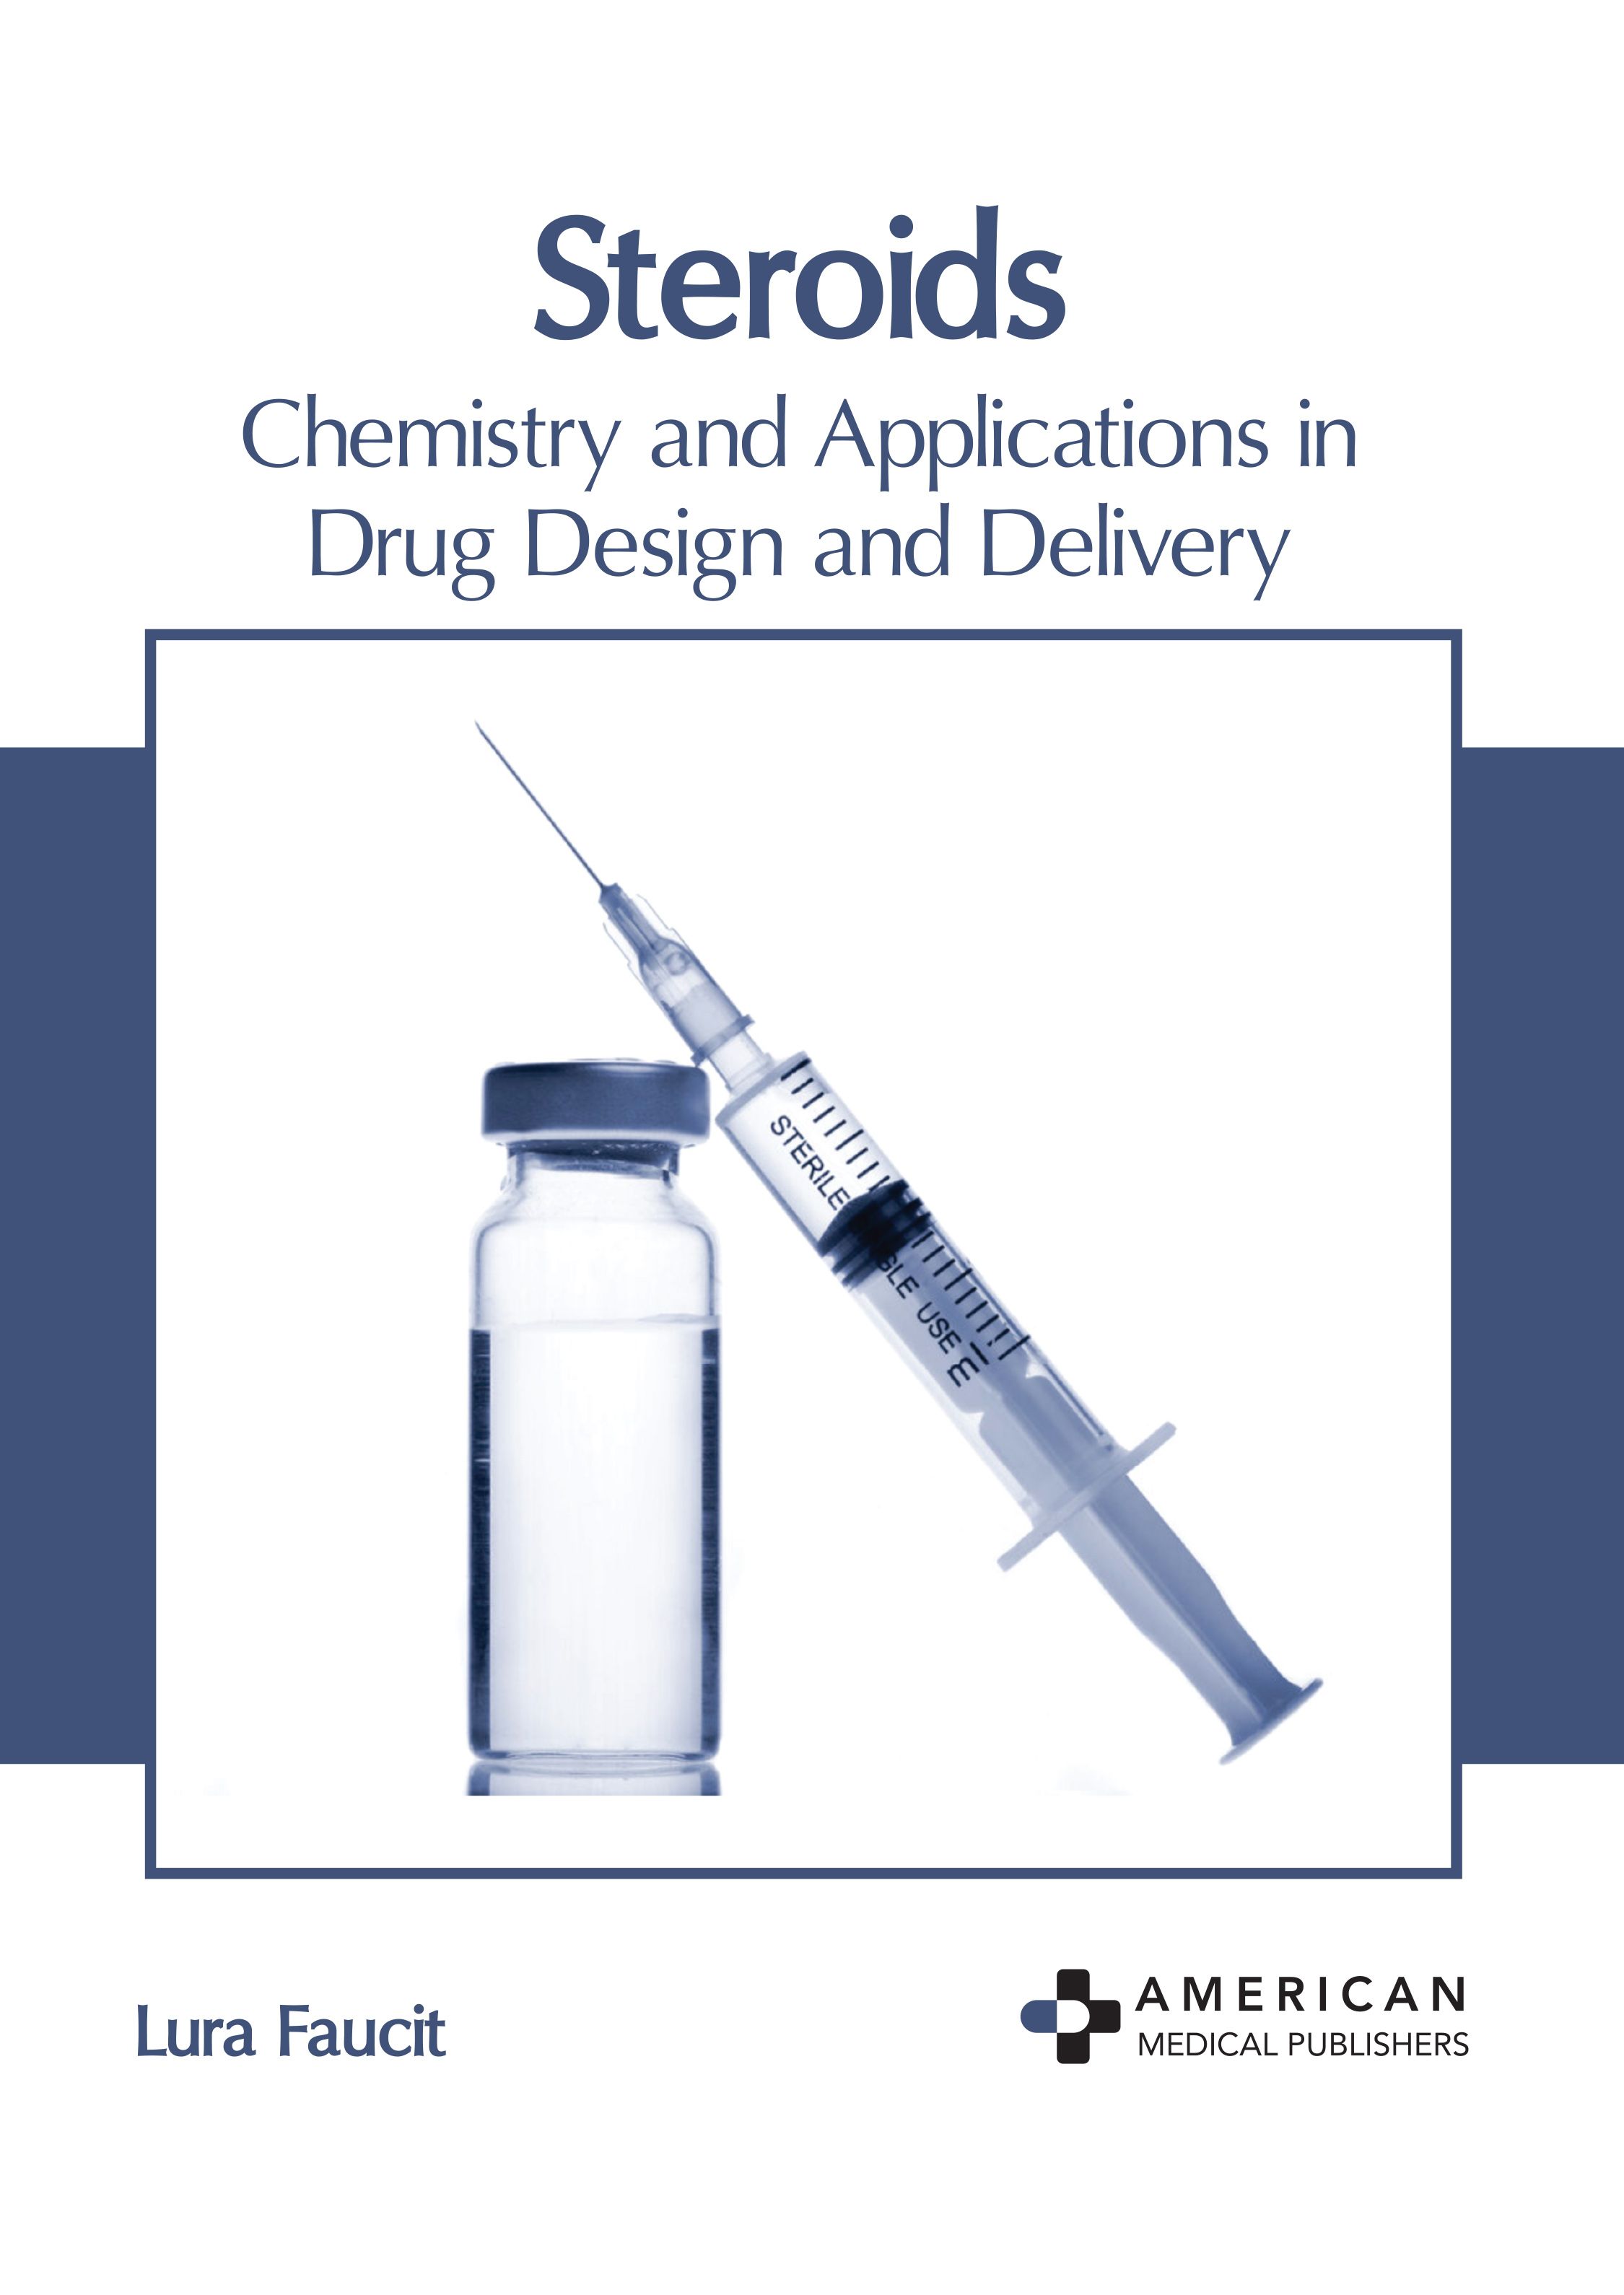 STEROIDS: CHEMISTRY AND APPLICATIONS IN DRUG DESIGN AND DELIVERY